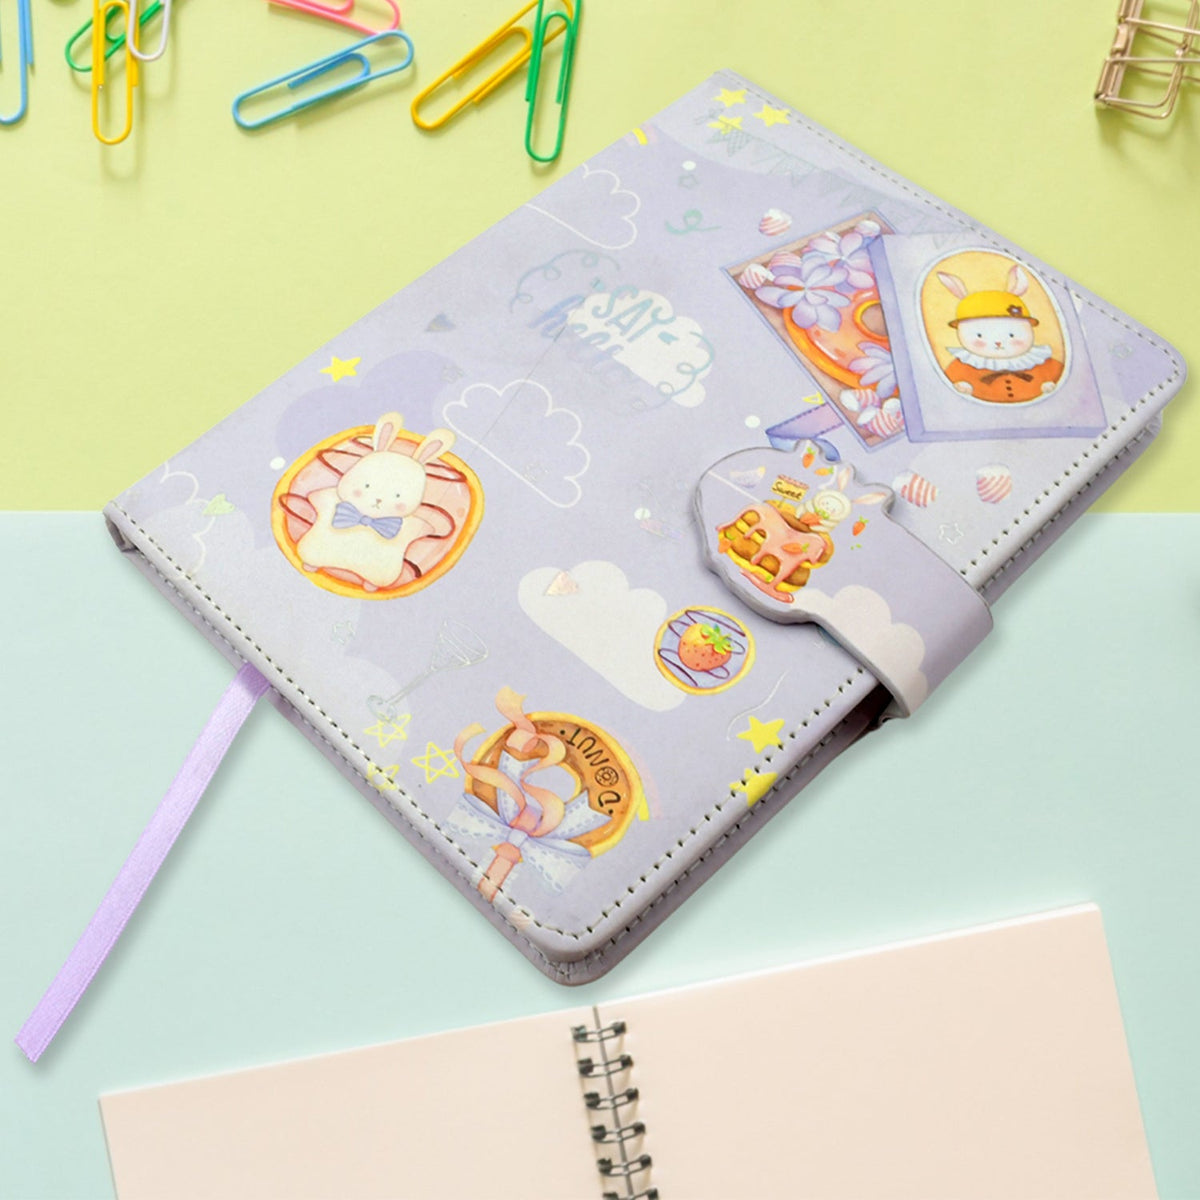 4117 Notebook Diary Budget Books Office Accessories Notepad Journals School Students Diary Portable Travel Hand Books,  Notebooks for Girls Diary Notepad for College Students Stationary Items Best Birthday Return Gifts ( 12.4x16.8 CM / 112 Pages)